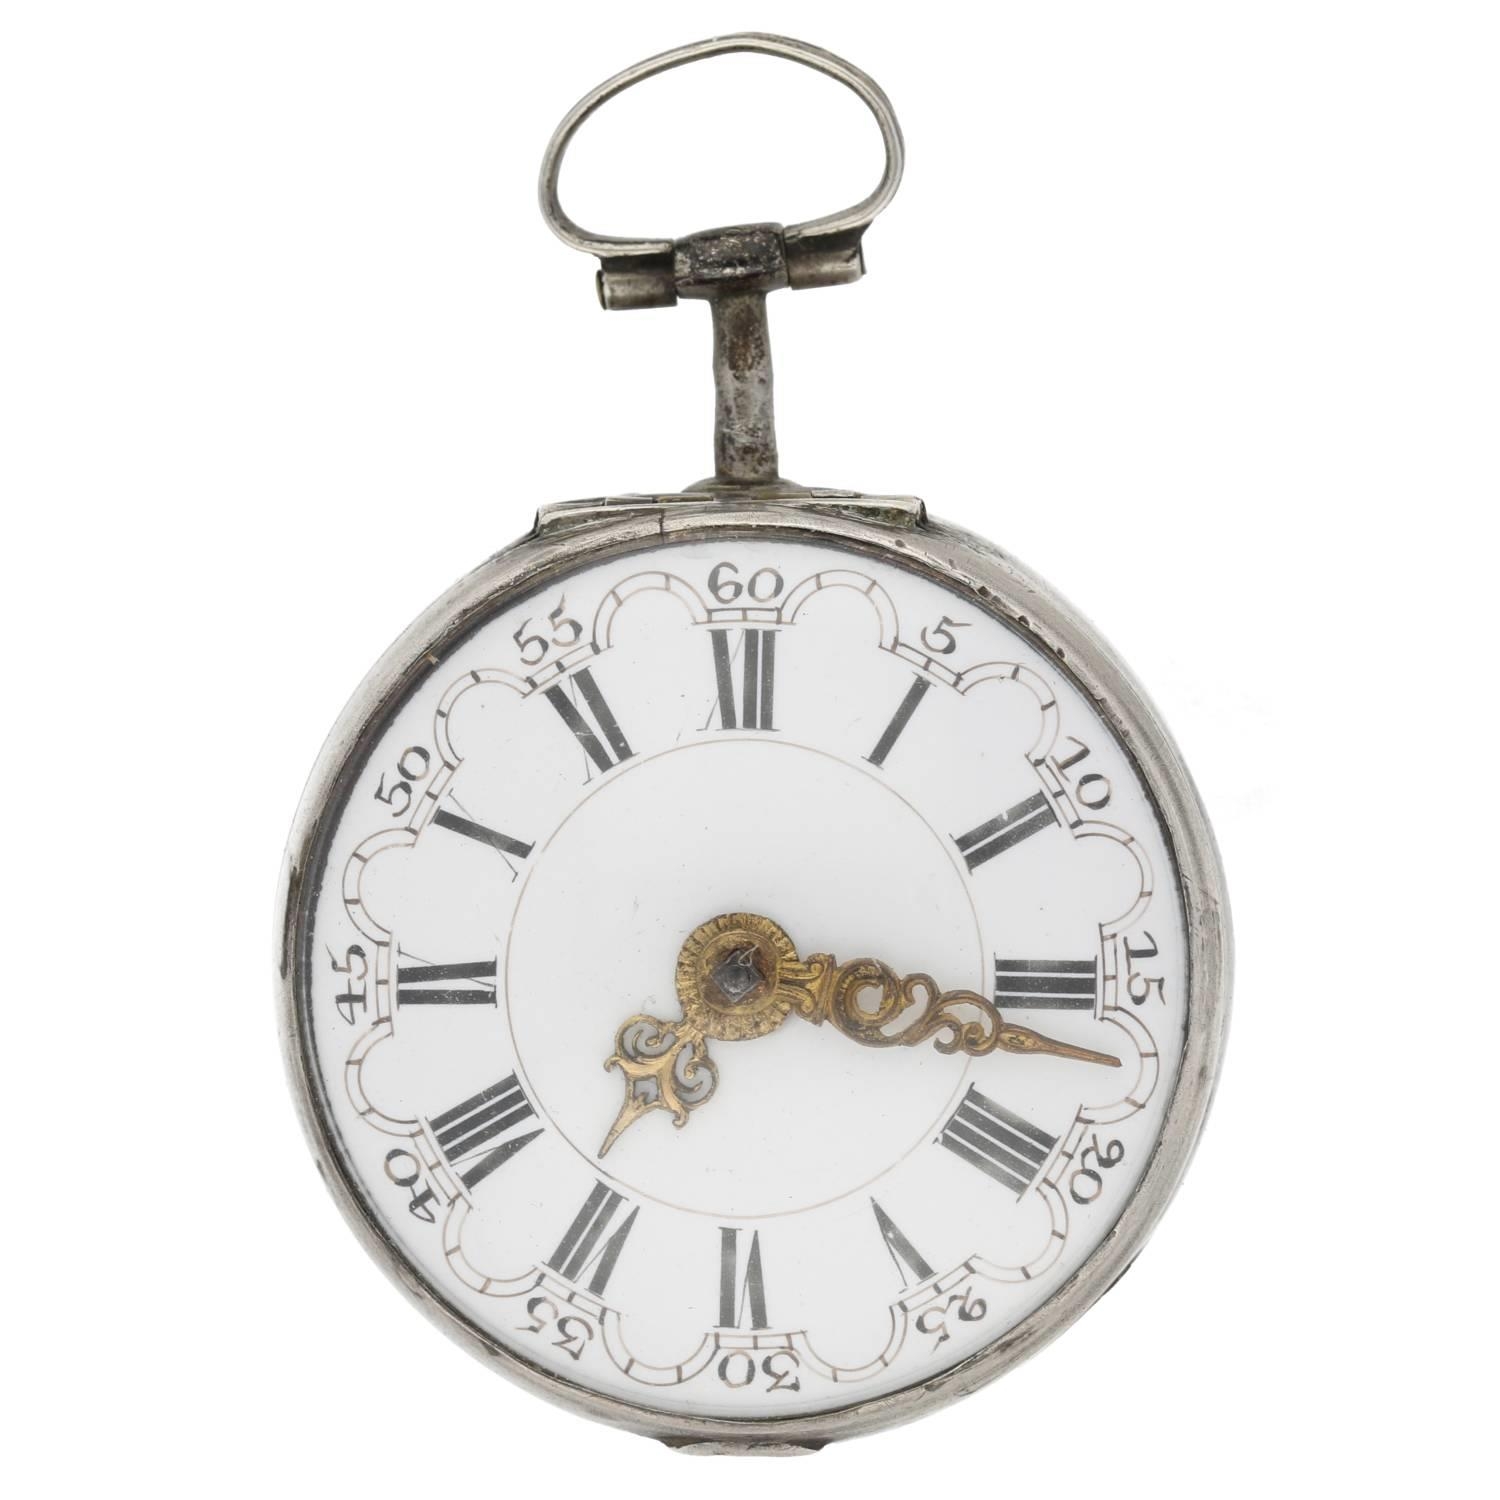 Samson, London - George III English silver repoussé pair cased verge pocket watch, signed fusee - Image 3 of 10